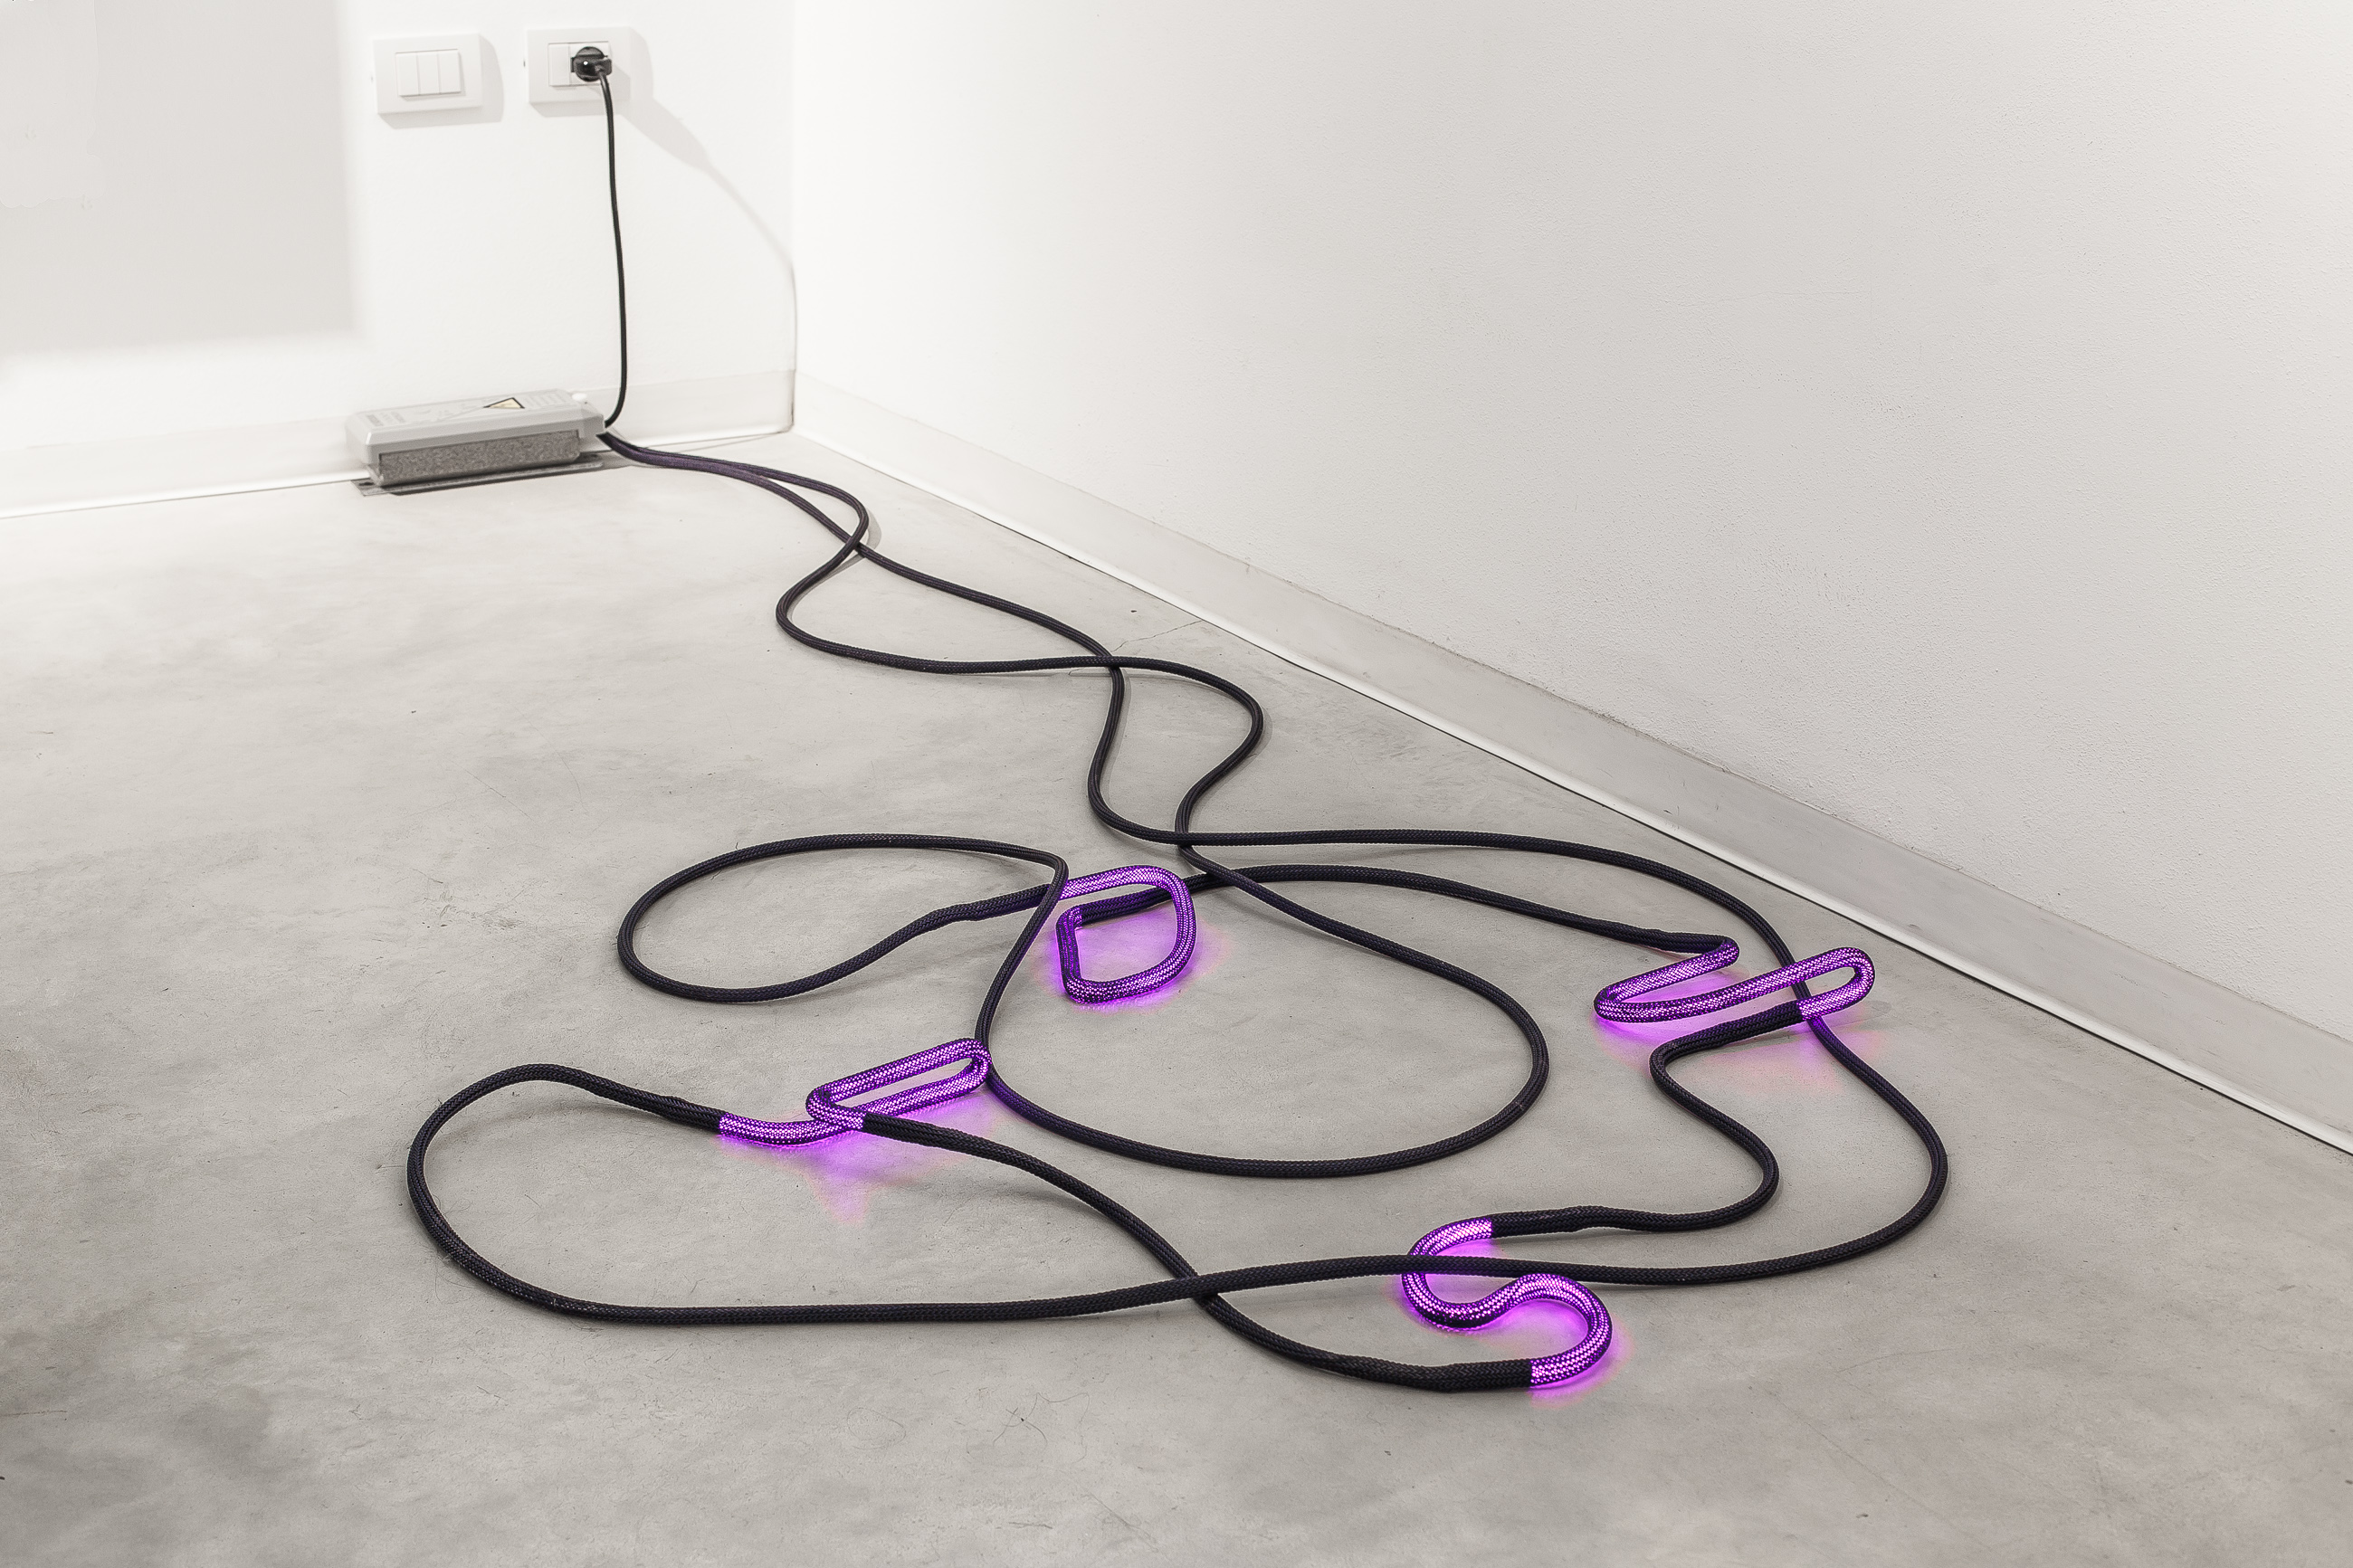 Installation view by Arthur Duff, Dust, 2015, polyester twist and violet neon, variable measures